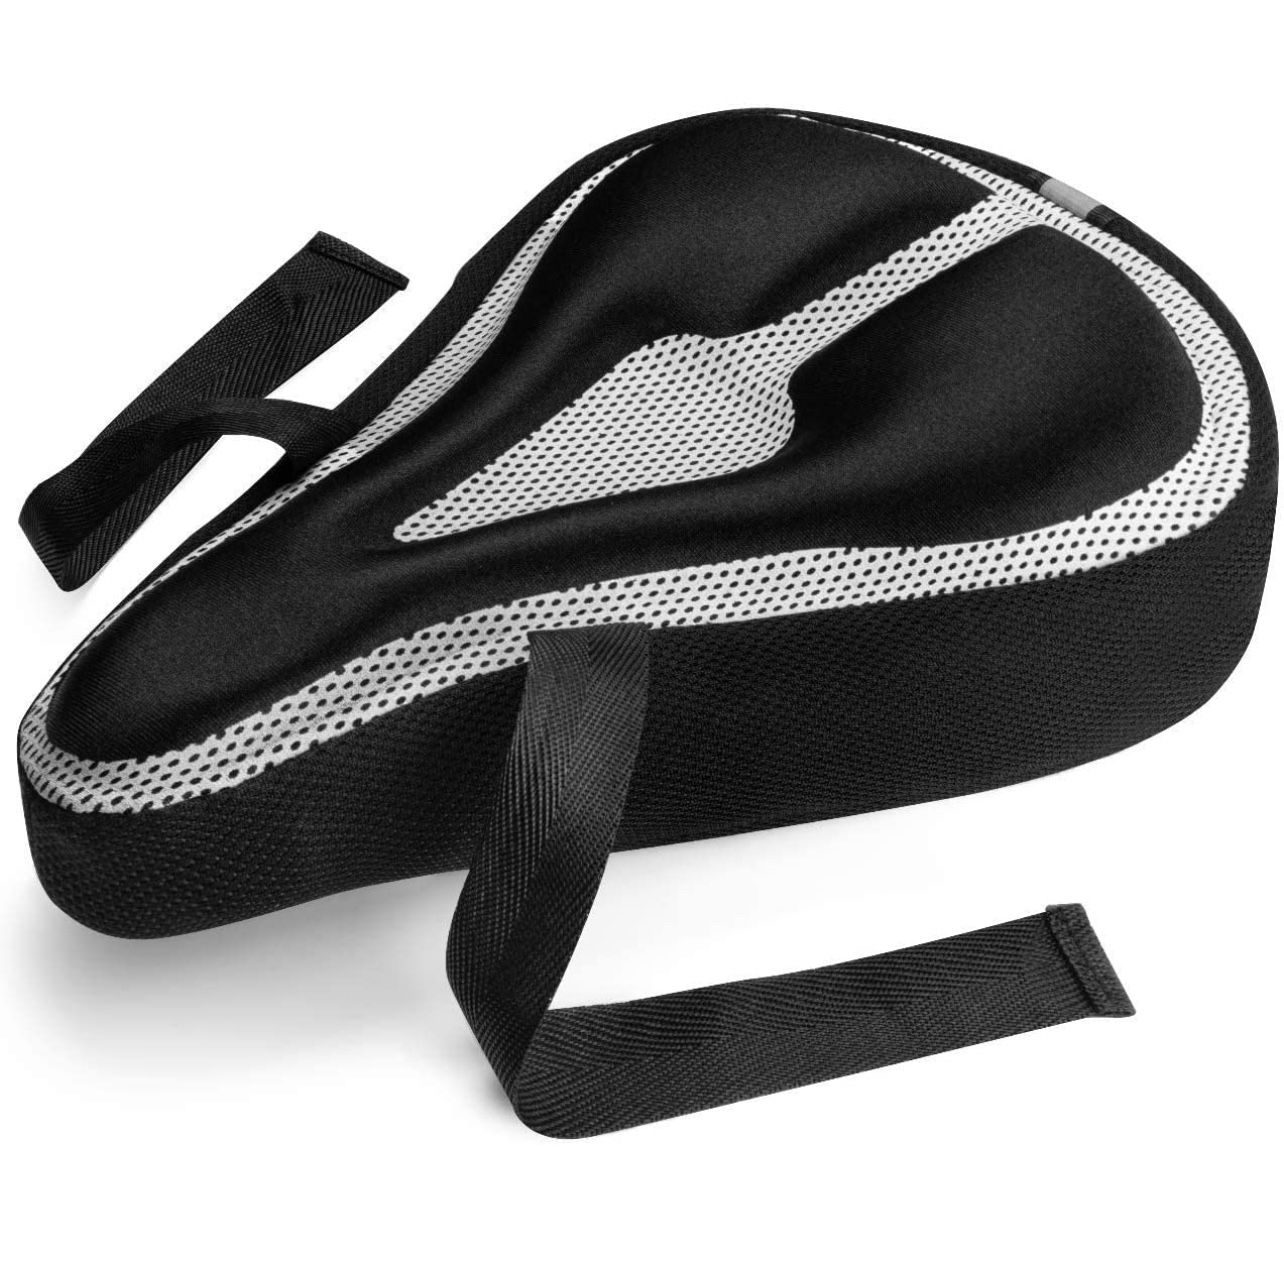 Bike Seat Cushion Cover - Padded, Comfort Gel Bicycle Pad for Mountain